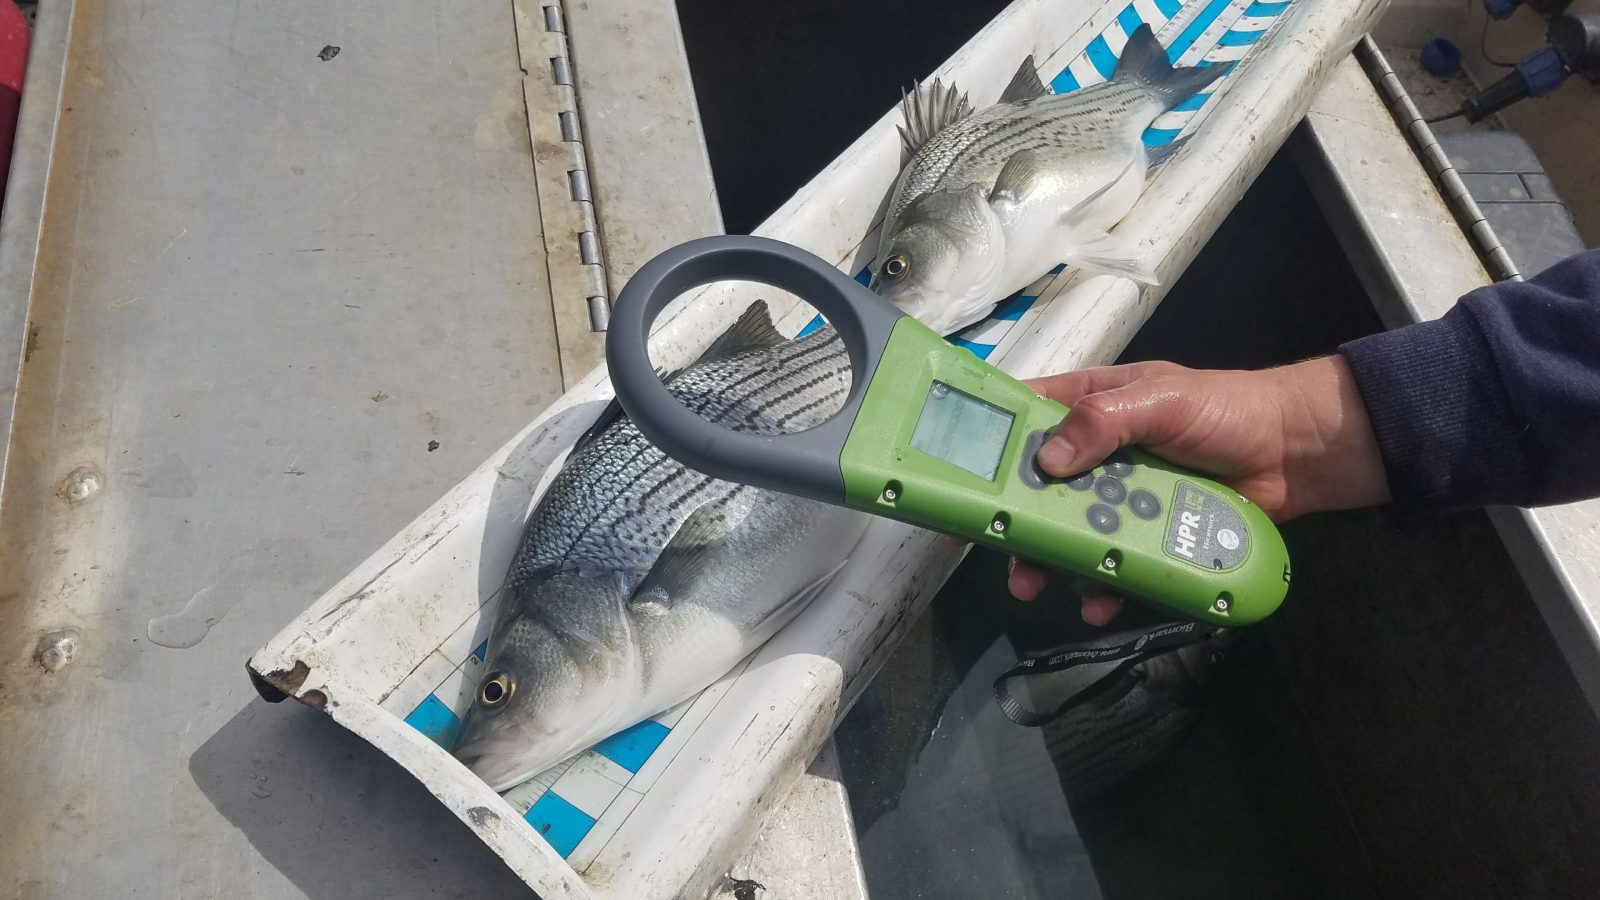 assessing fishery - fishery professionals - electrofishing - on the job - measuring fish - fish data collection - fish species and fish stocking - fisheries maintenance - fisheries services